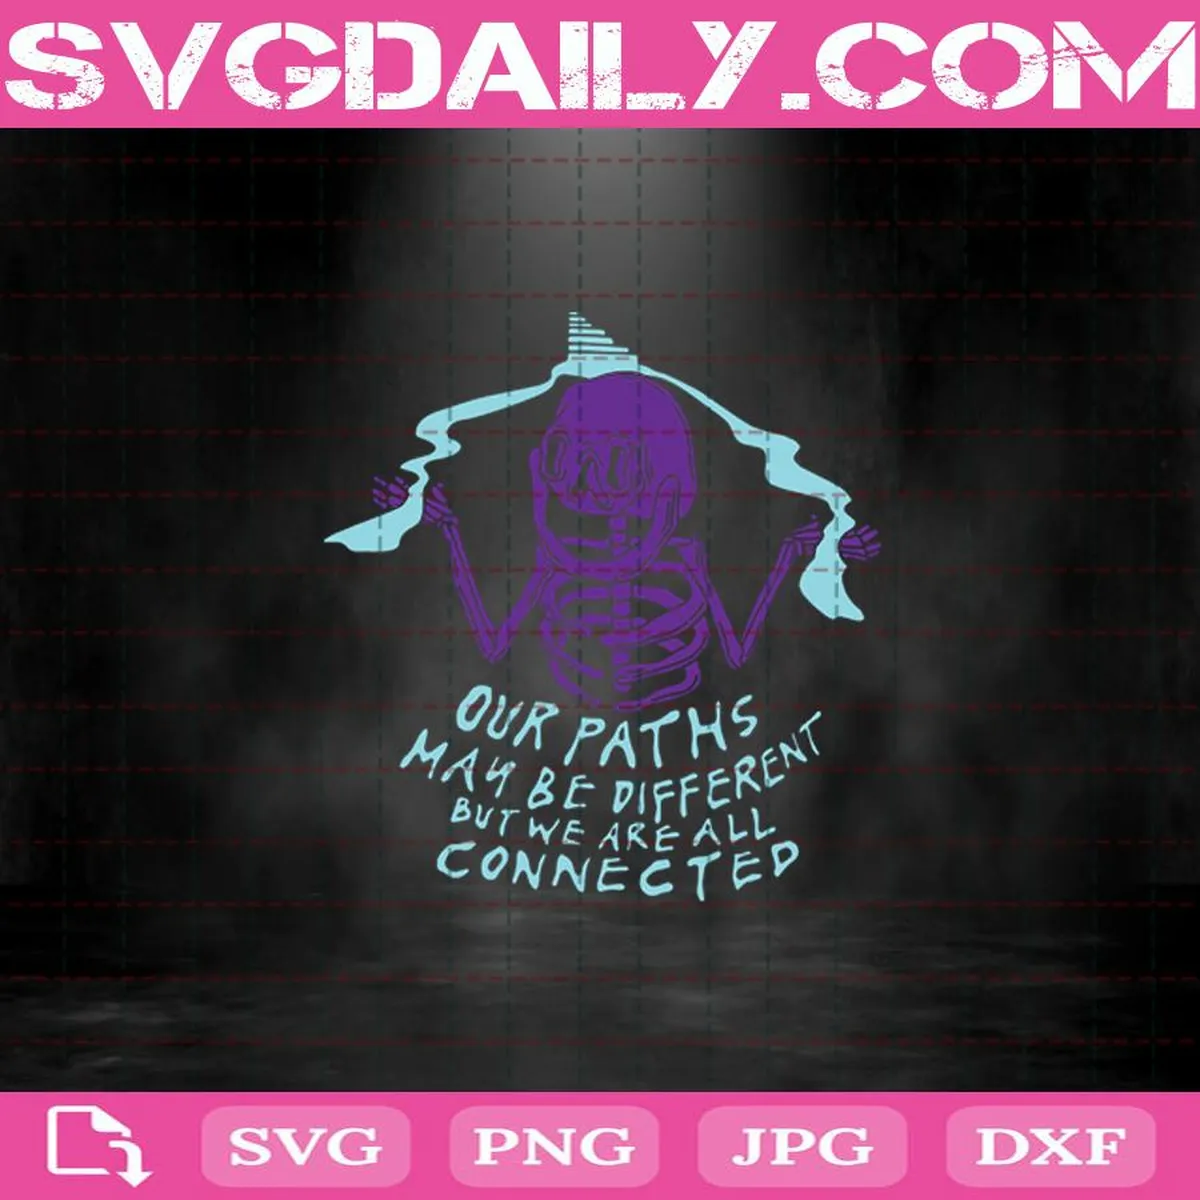 Skeleton Out Paths May Be Different But We Are All Connected Svg, Funny Skeleton Svg, Skeleton Svg, Halloween Svg